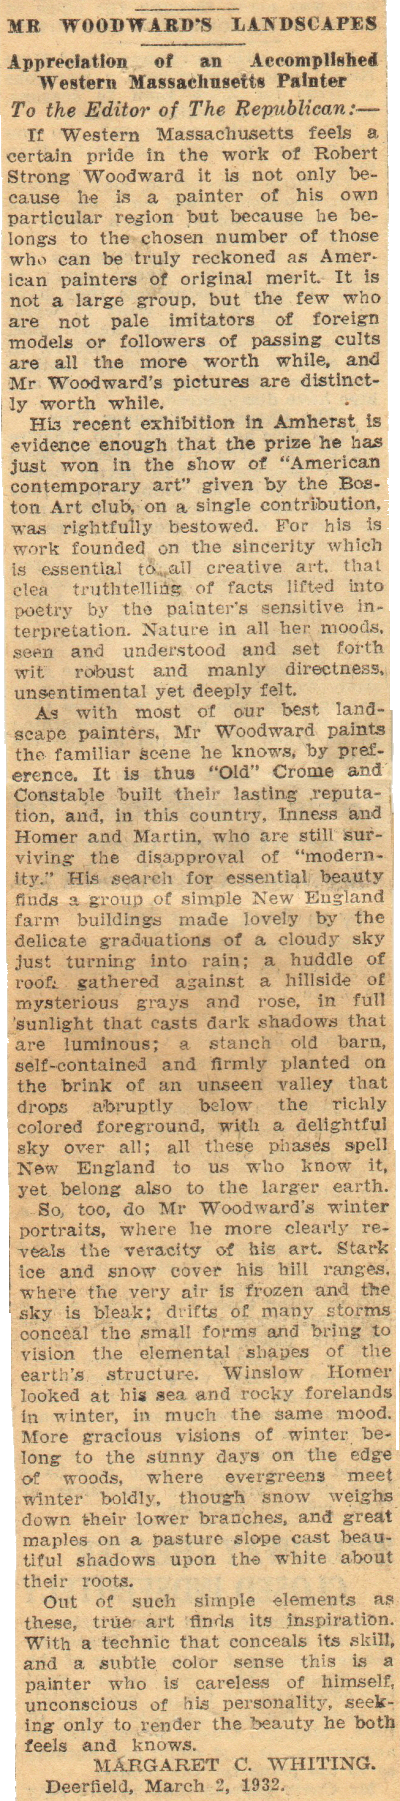 Margaret Whiting Critique, a letter to the Editor of the Springfield Republican, March 2, 1932 